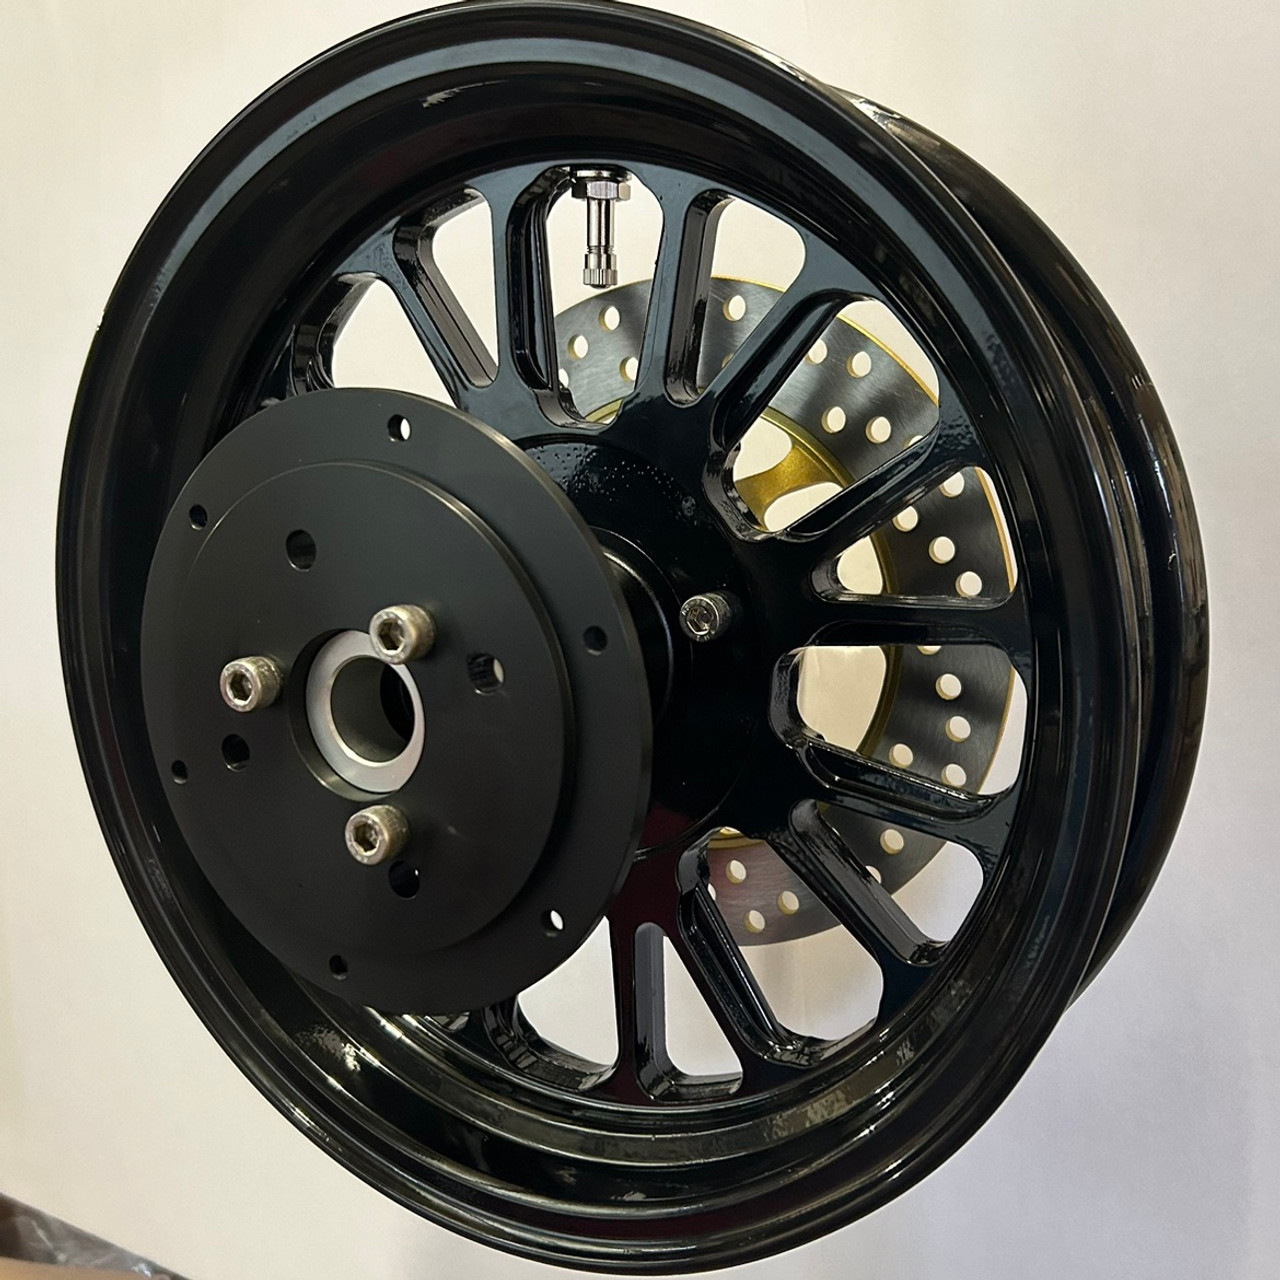 12 inch Cnc Machined wheels 2.75 inches wide. Front and rear assembly Sprocket not included. 